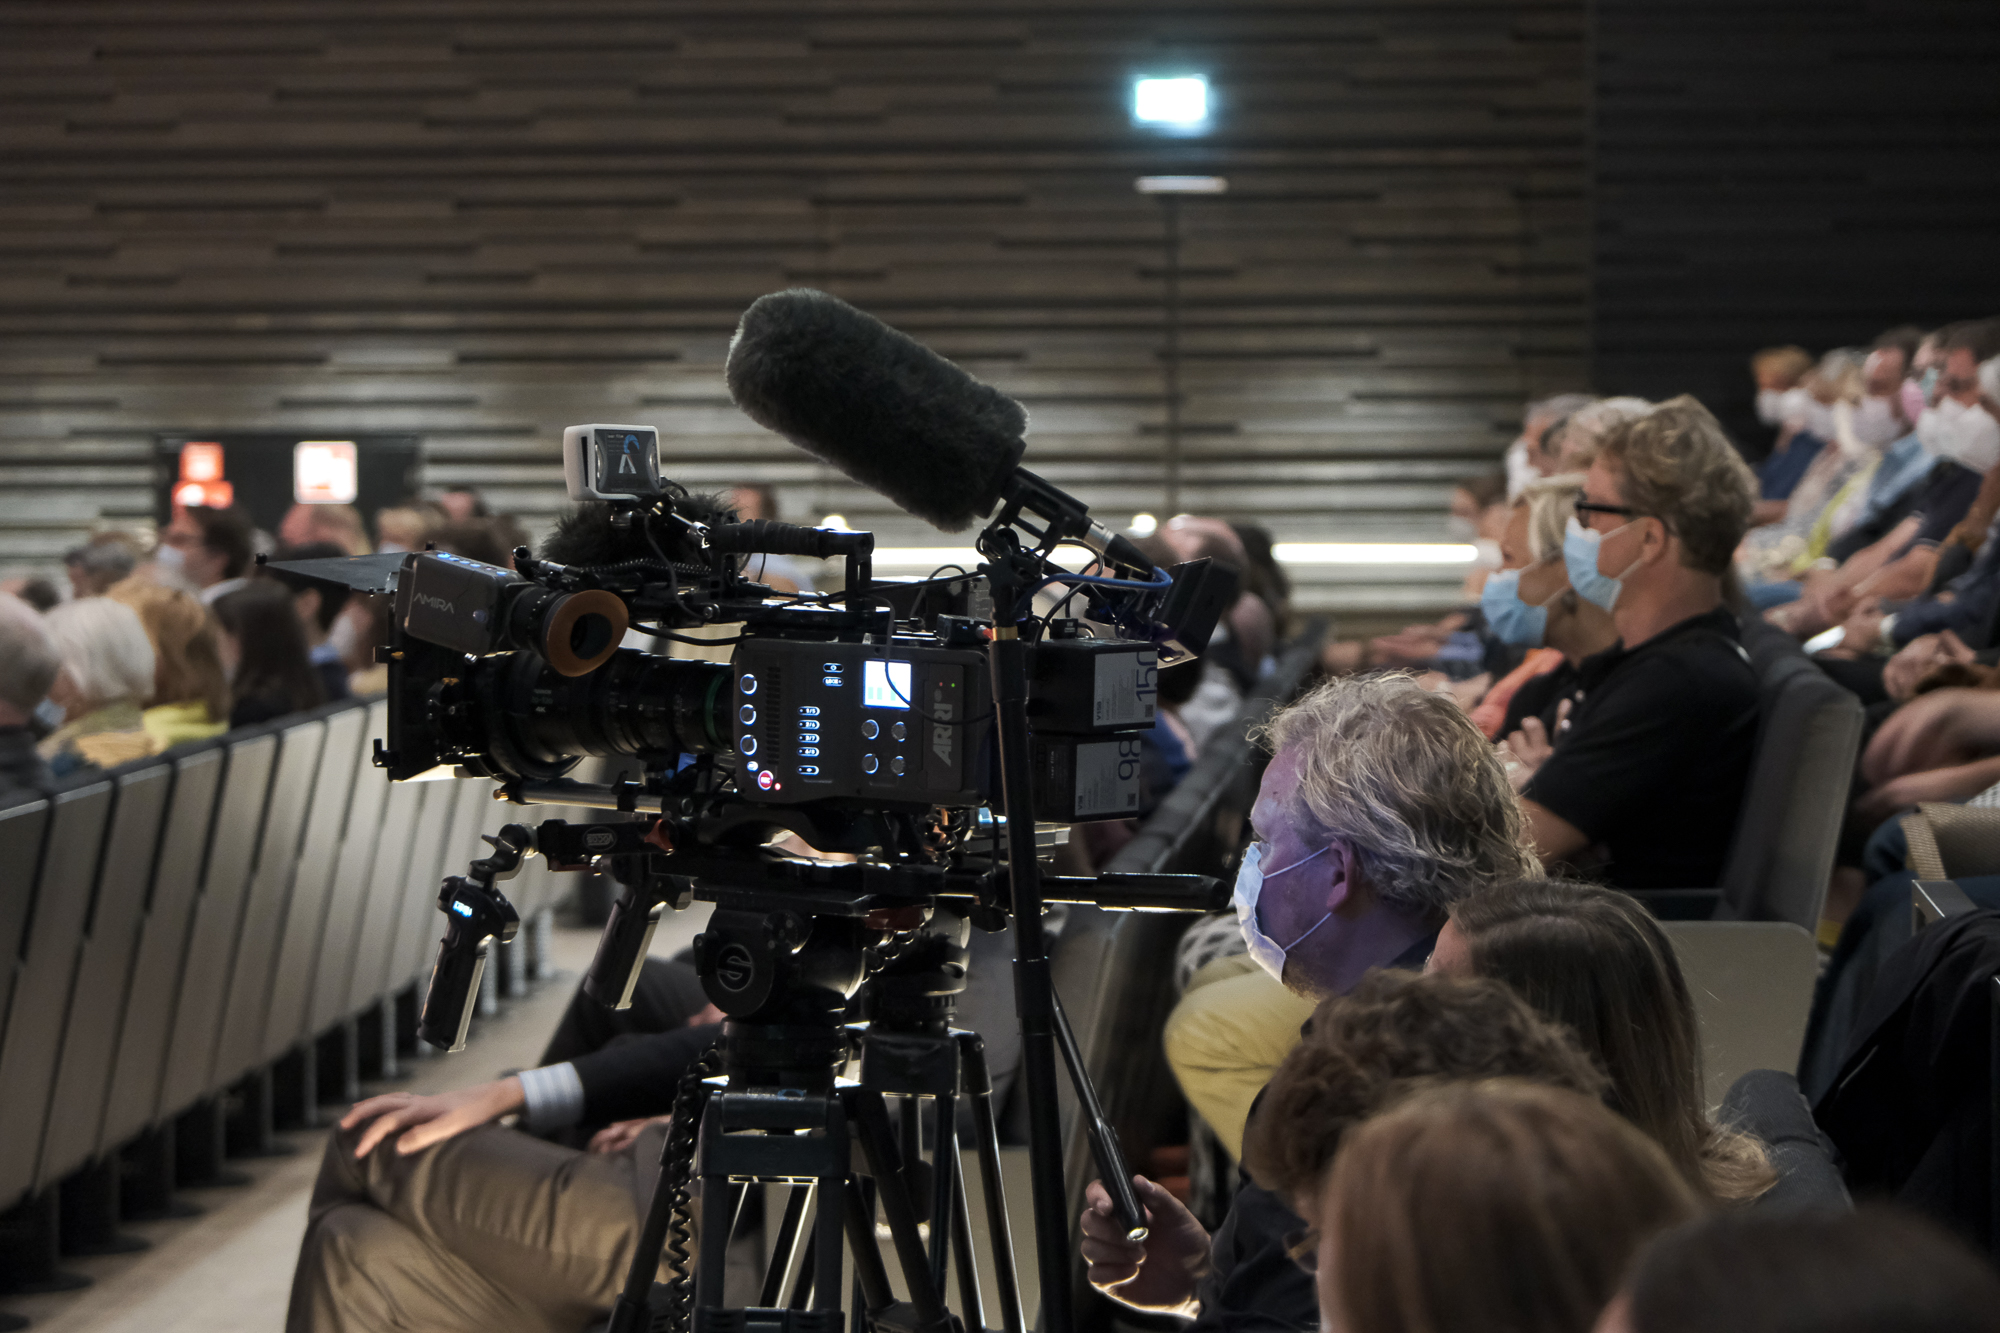 Rows of seats in the Isarphilharmonie with people, a TV camera with a microphone is set up between them
